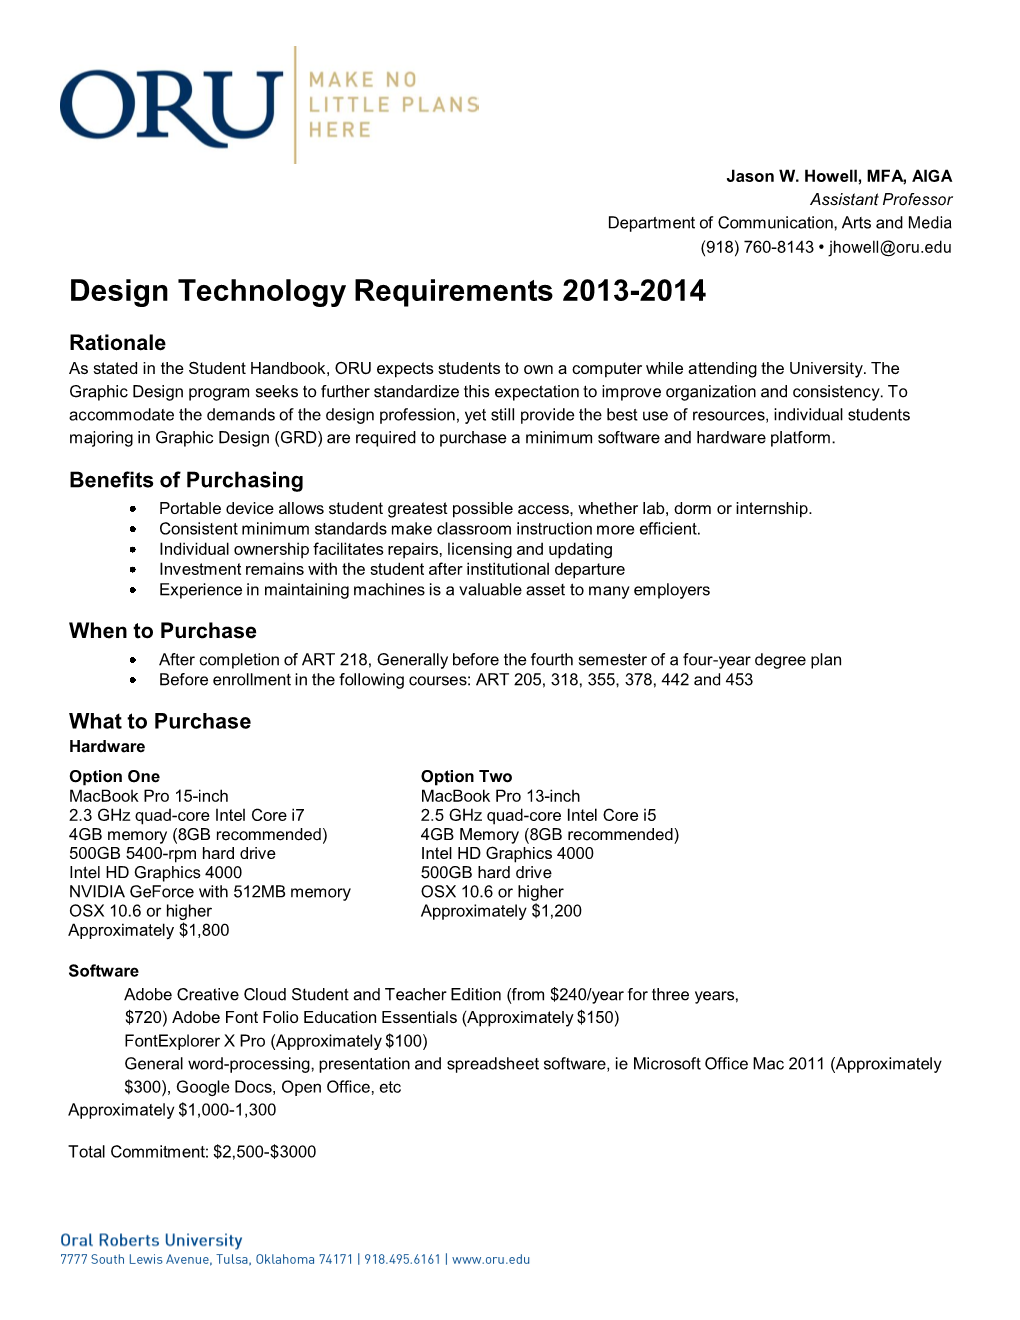 Design Technology Requirements 2013-2014